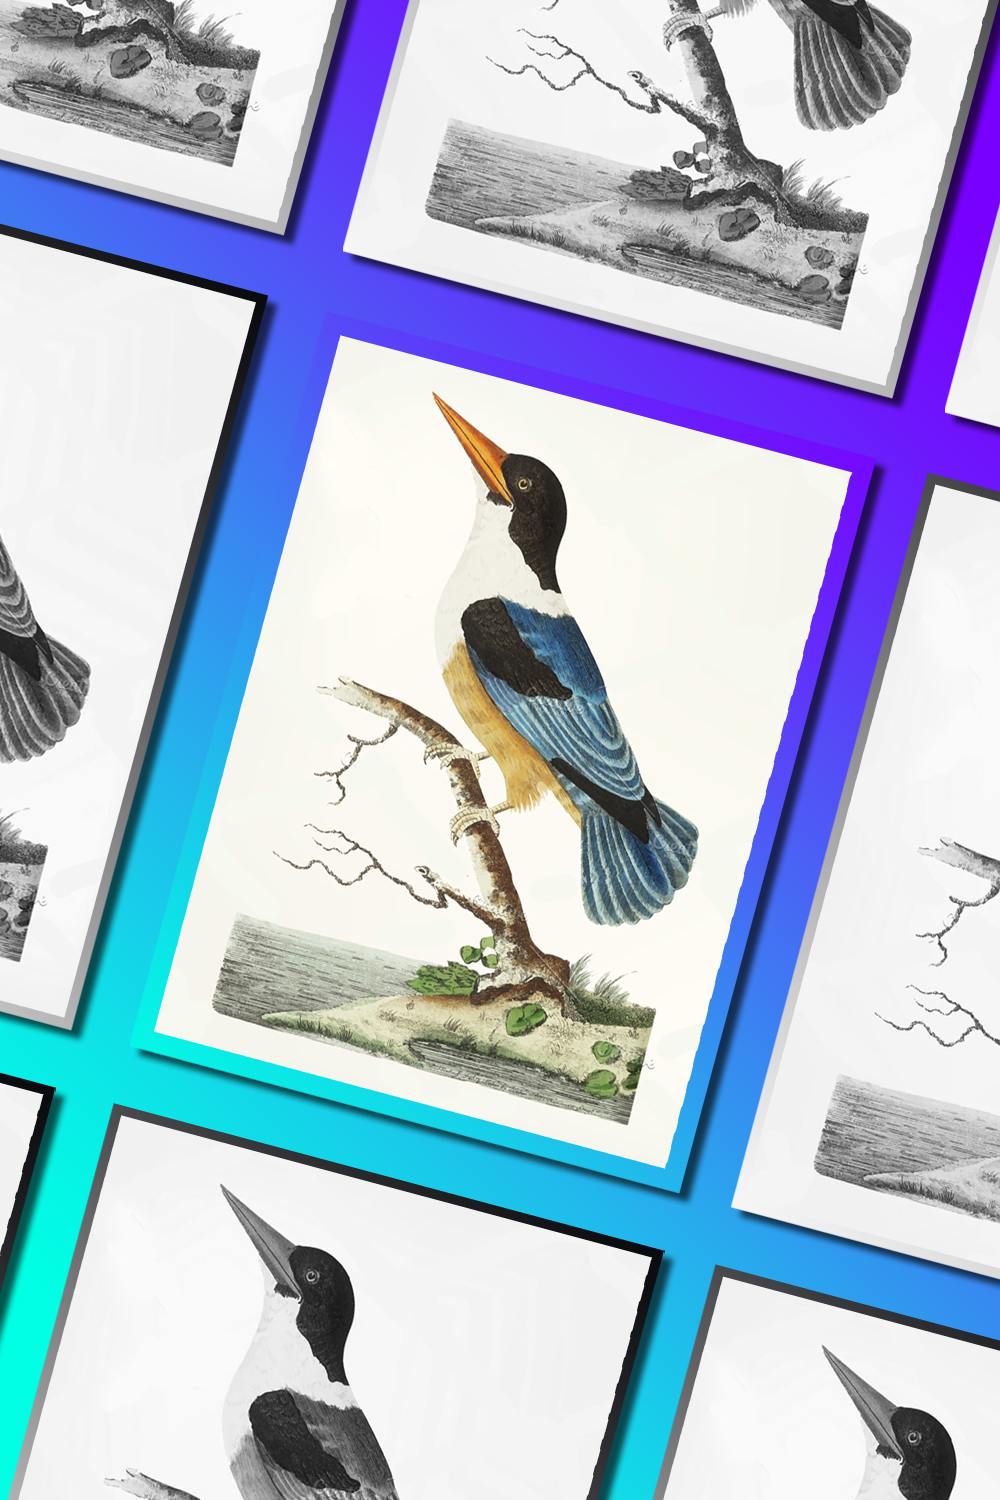 Illustrations drawing of black capped kingfisher of pinterest.